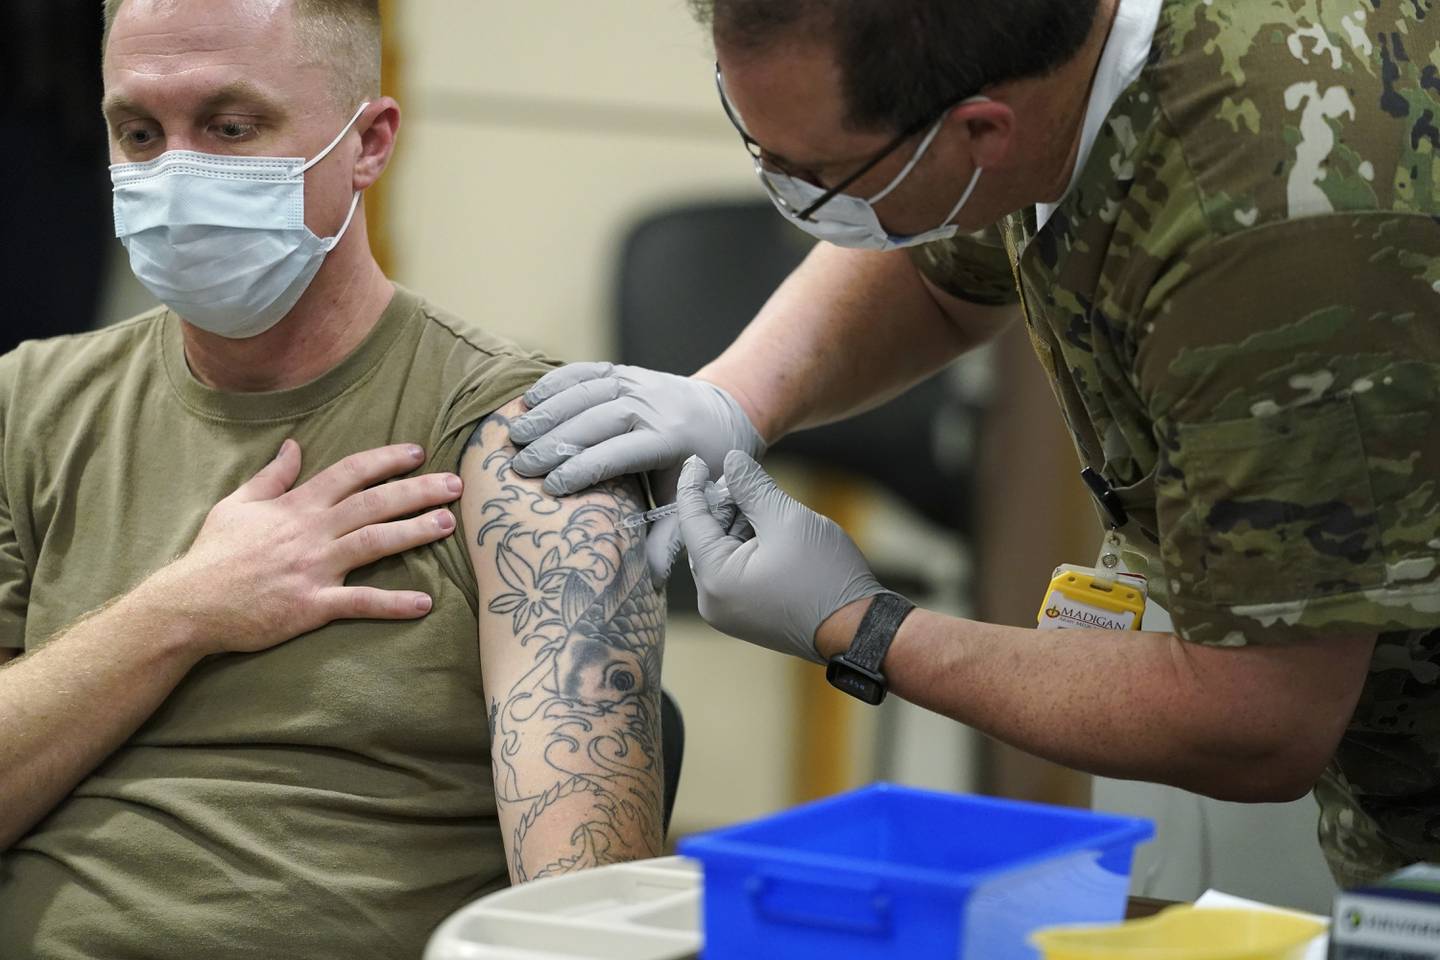 The Army says 98 per cent of its active duty force had received at least one dose of the mandatory coronavirus vaccine. AP